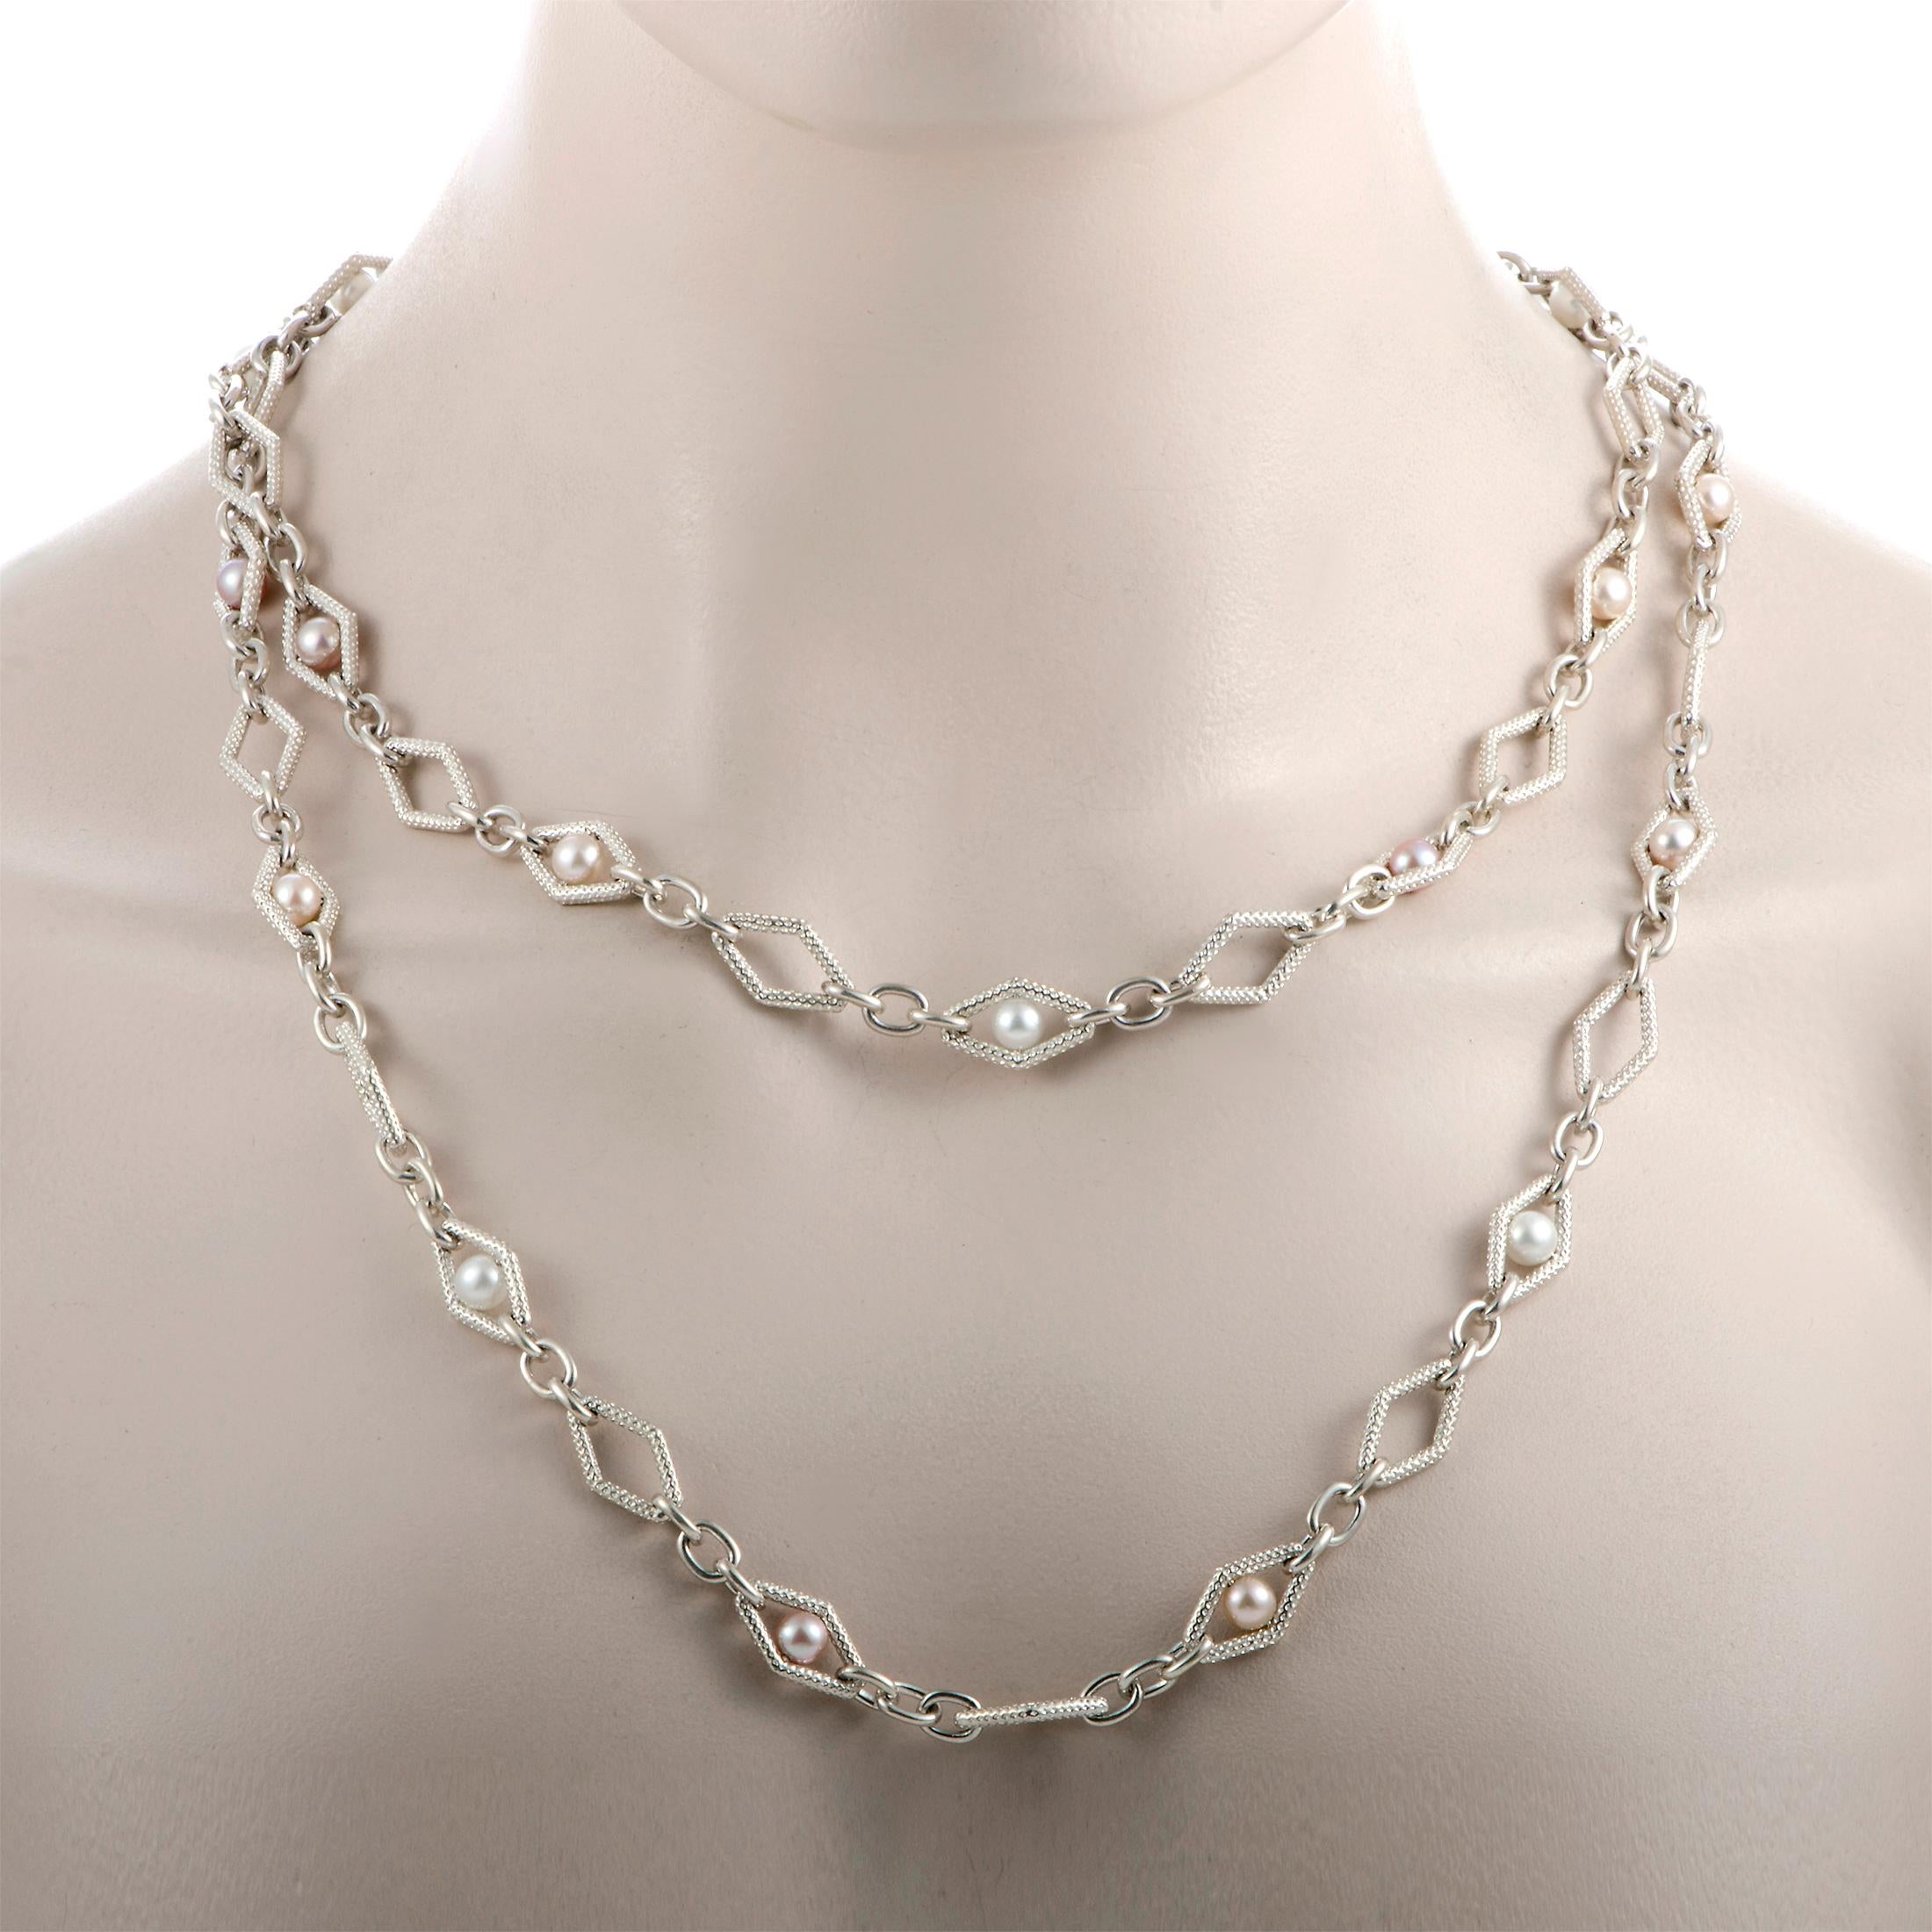 This Charles Krypell necklace is crafted from silver and embellished with pearls. The necklace weighs 172 grams and measures 40” in length.

Offered in brand new condition, this jewelry piece includes a gift box.